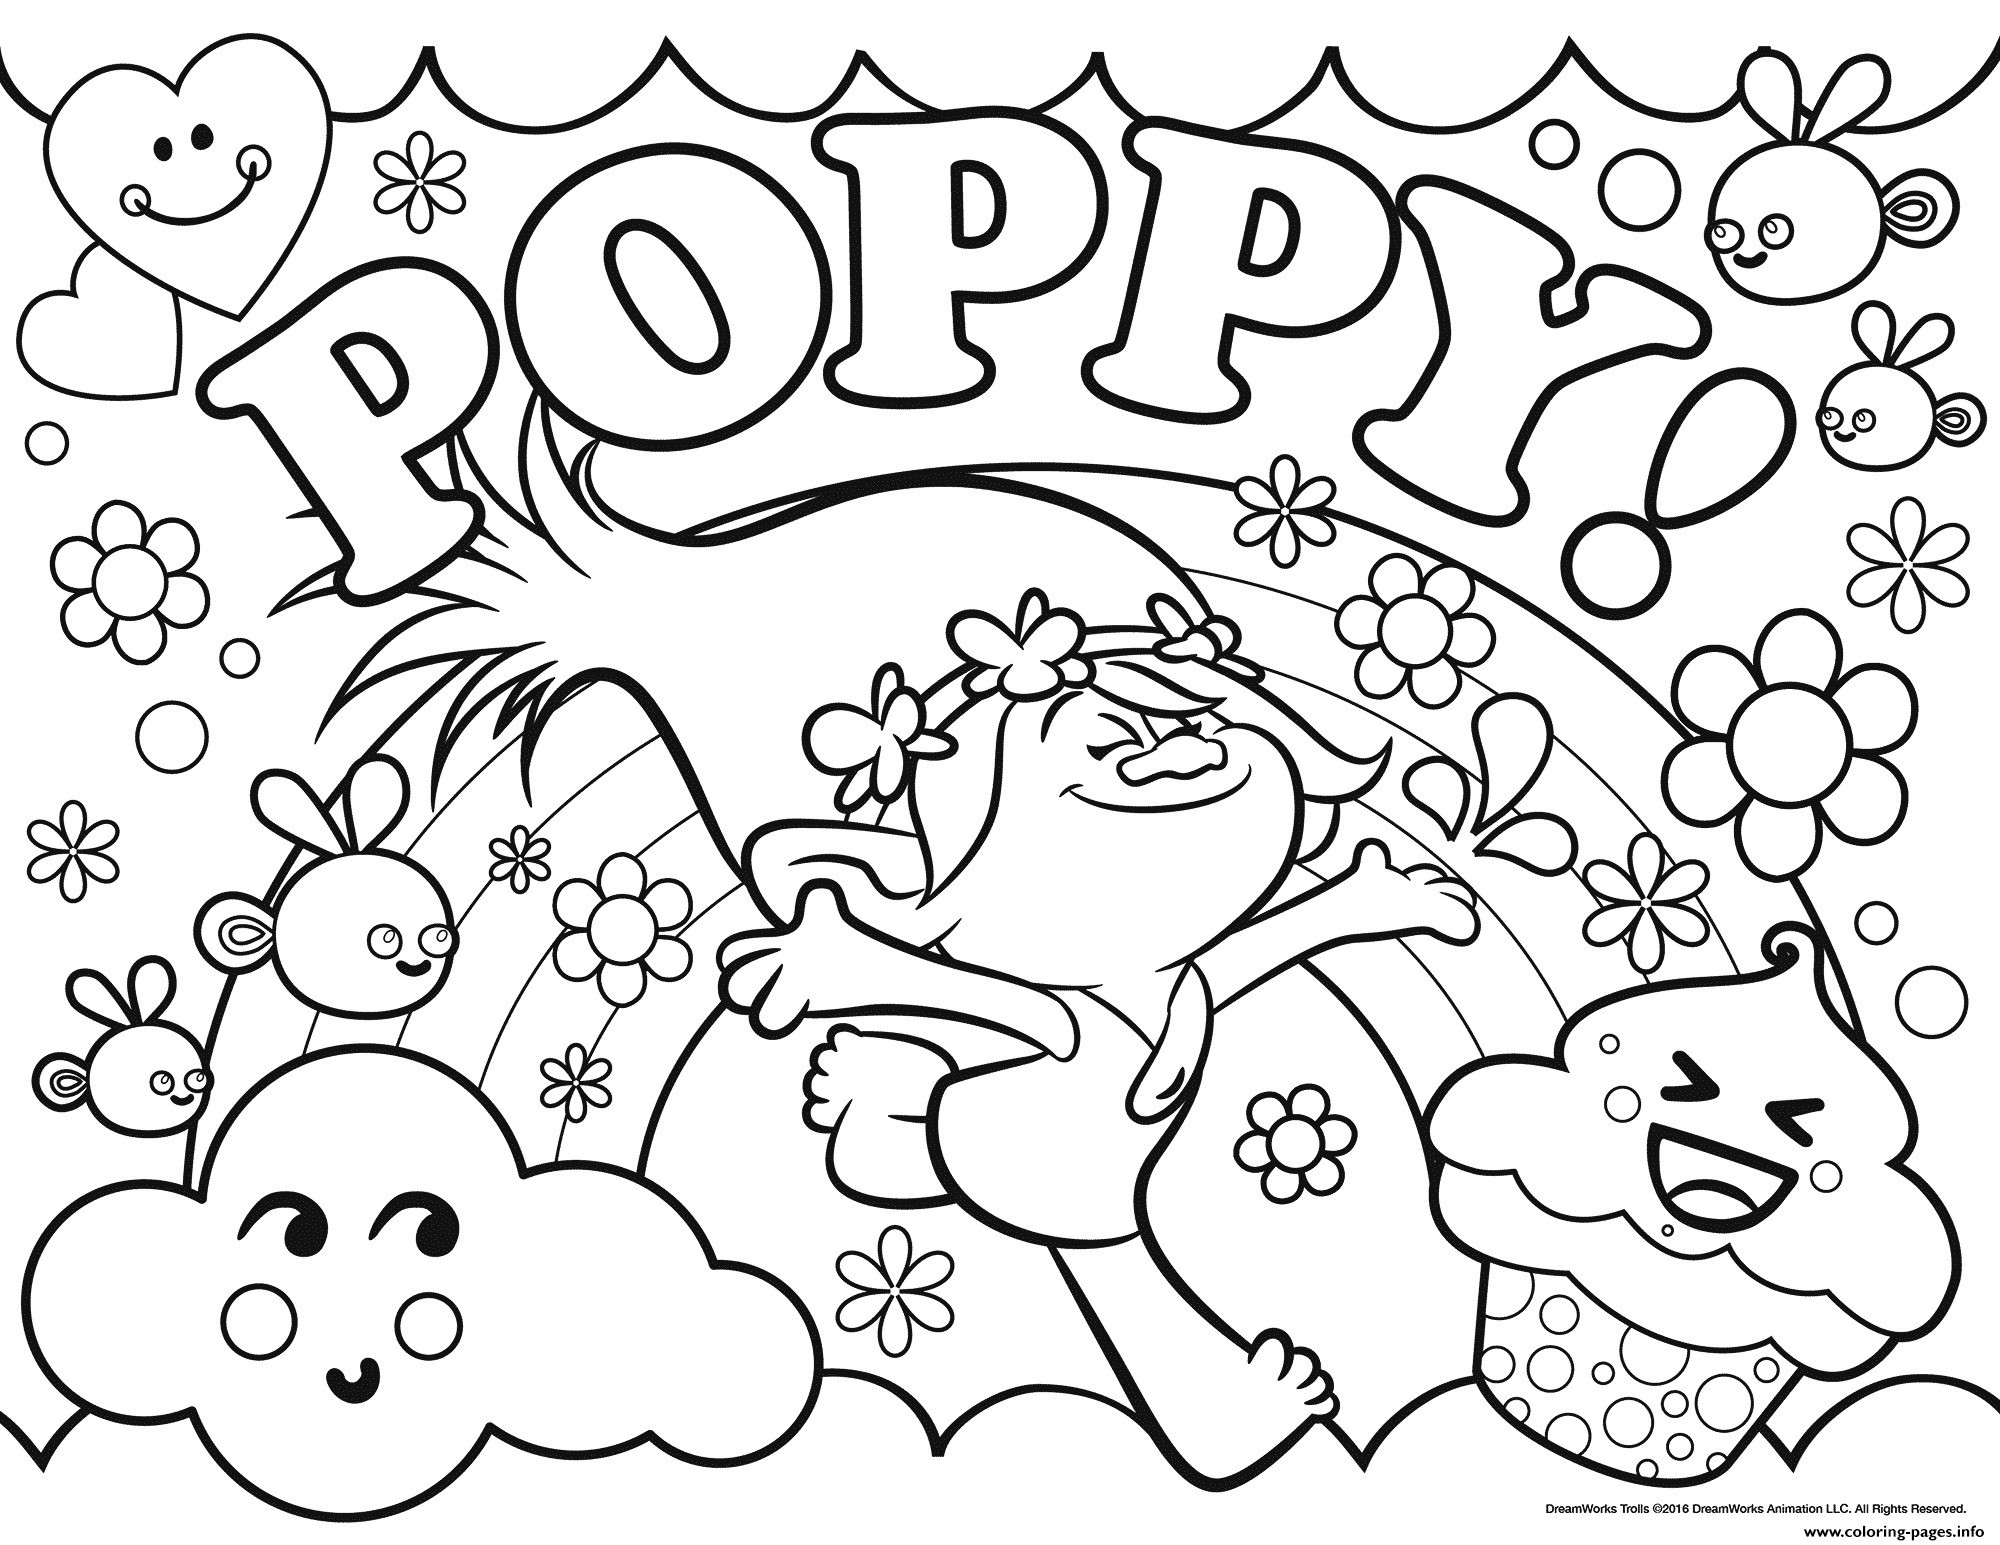 Free Trolls Colouring In Pages Wallpaper